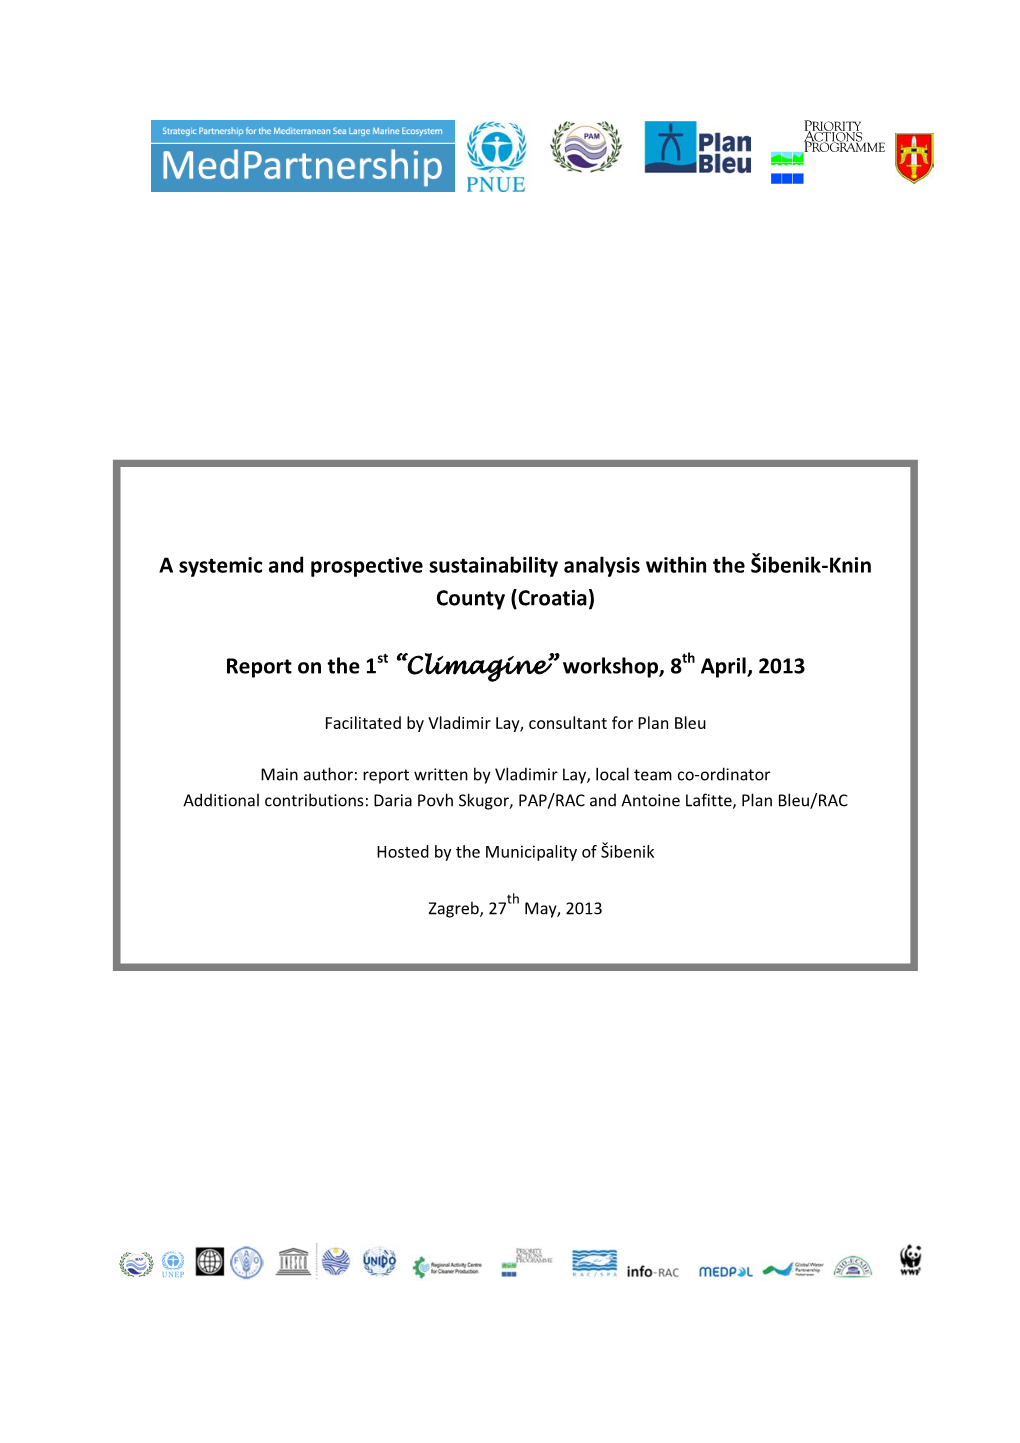 A Systemic and Prospective Sustainability Analysis Within the Šibenik-Knin County (Croatia) Report on the 1St “Climagine” W